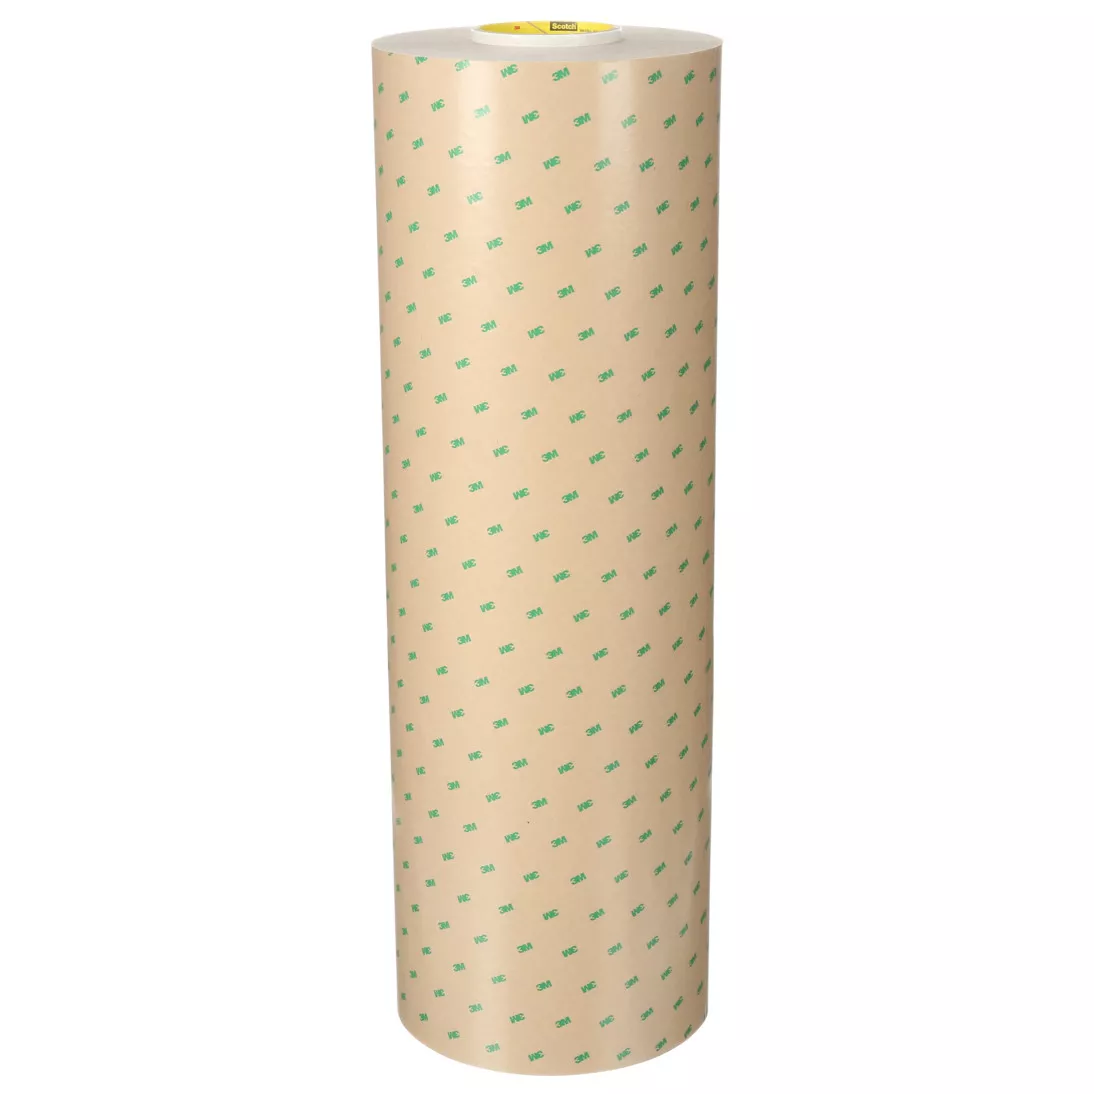 3M™ Adhesive Transfer Tape 9502, Clear, 48 in x 60 yd, 2 mil, 1 roll per
case